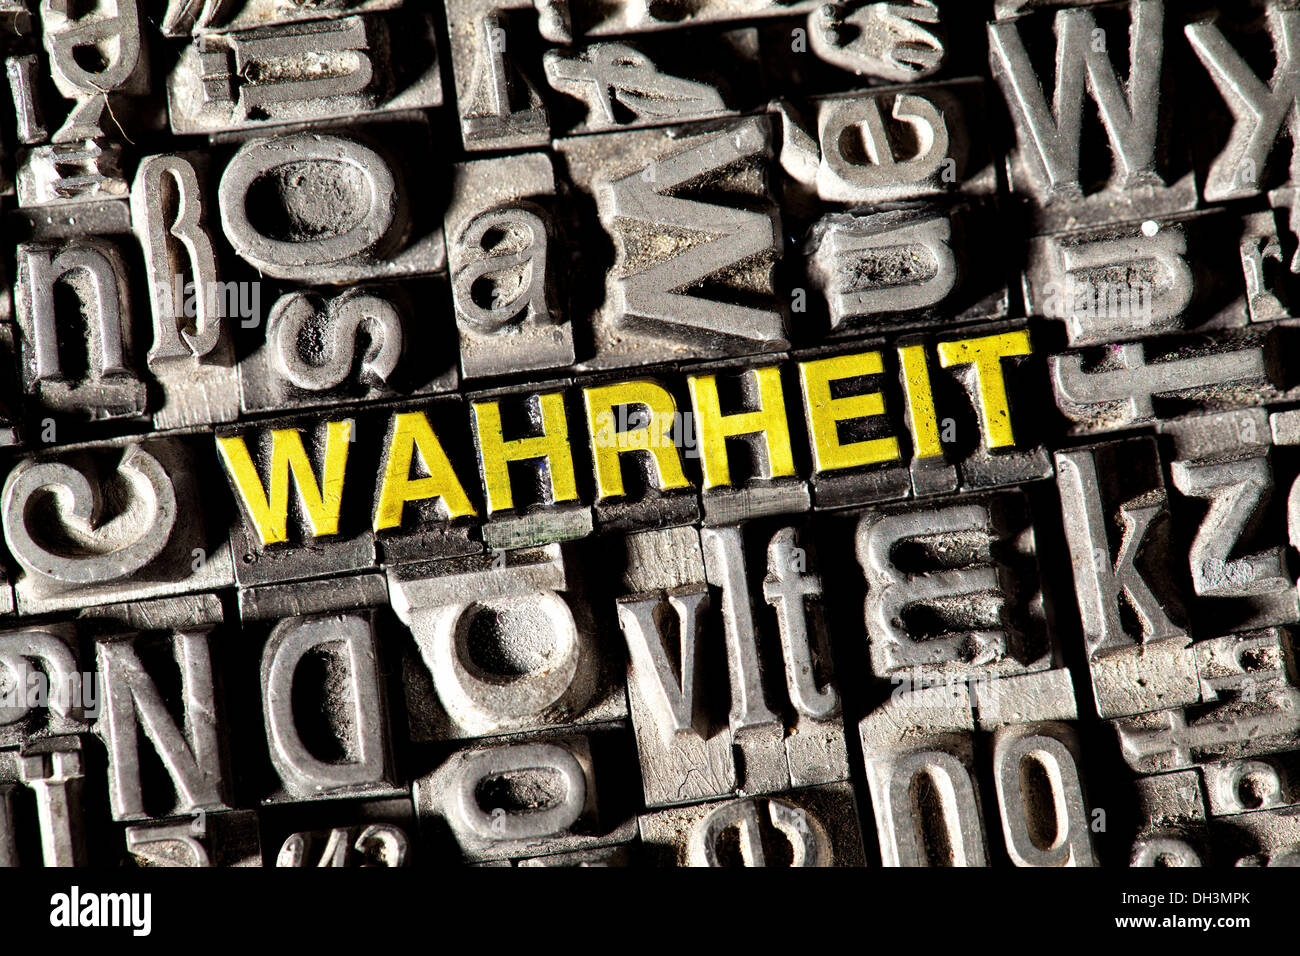 Old lead letters forming the word 'WAHRHEIT', German for 'TRUTH' Stock Photo